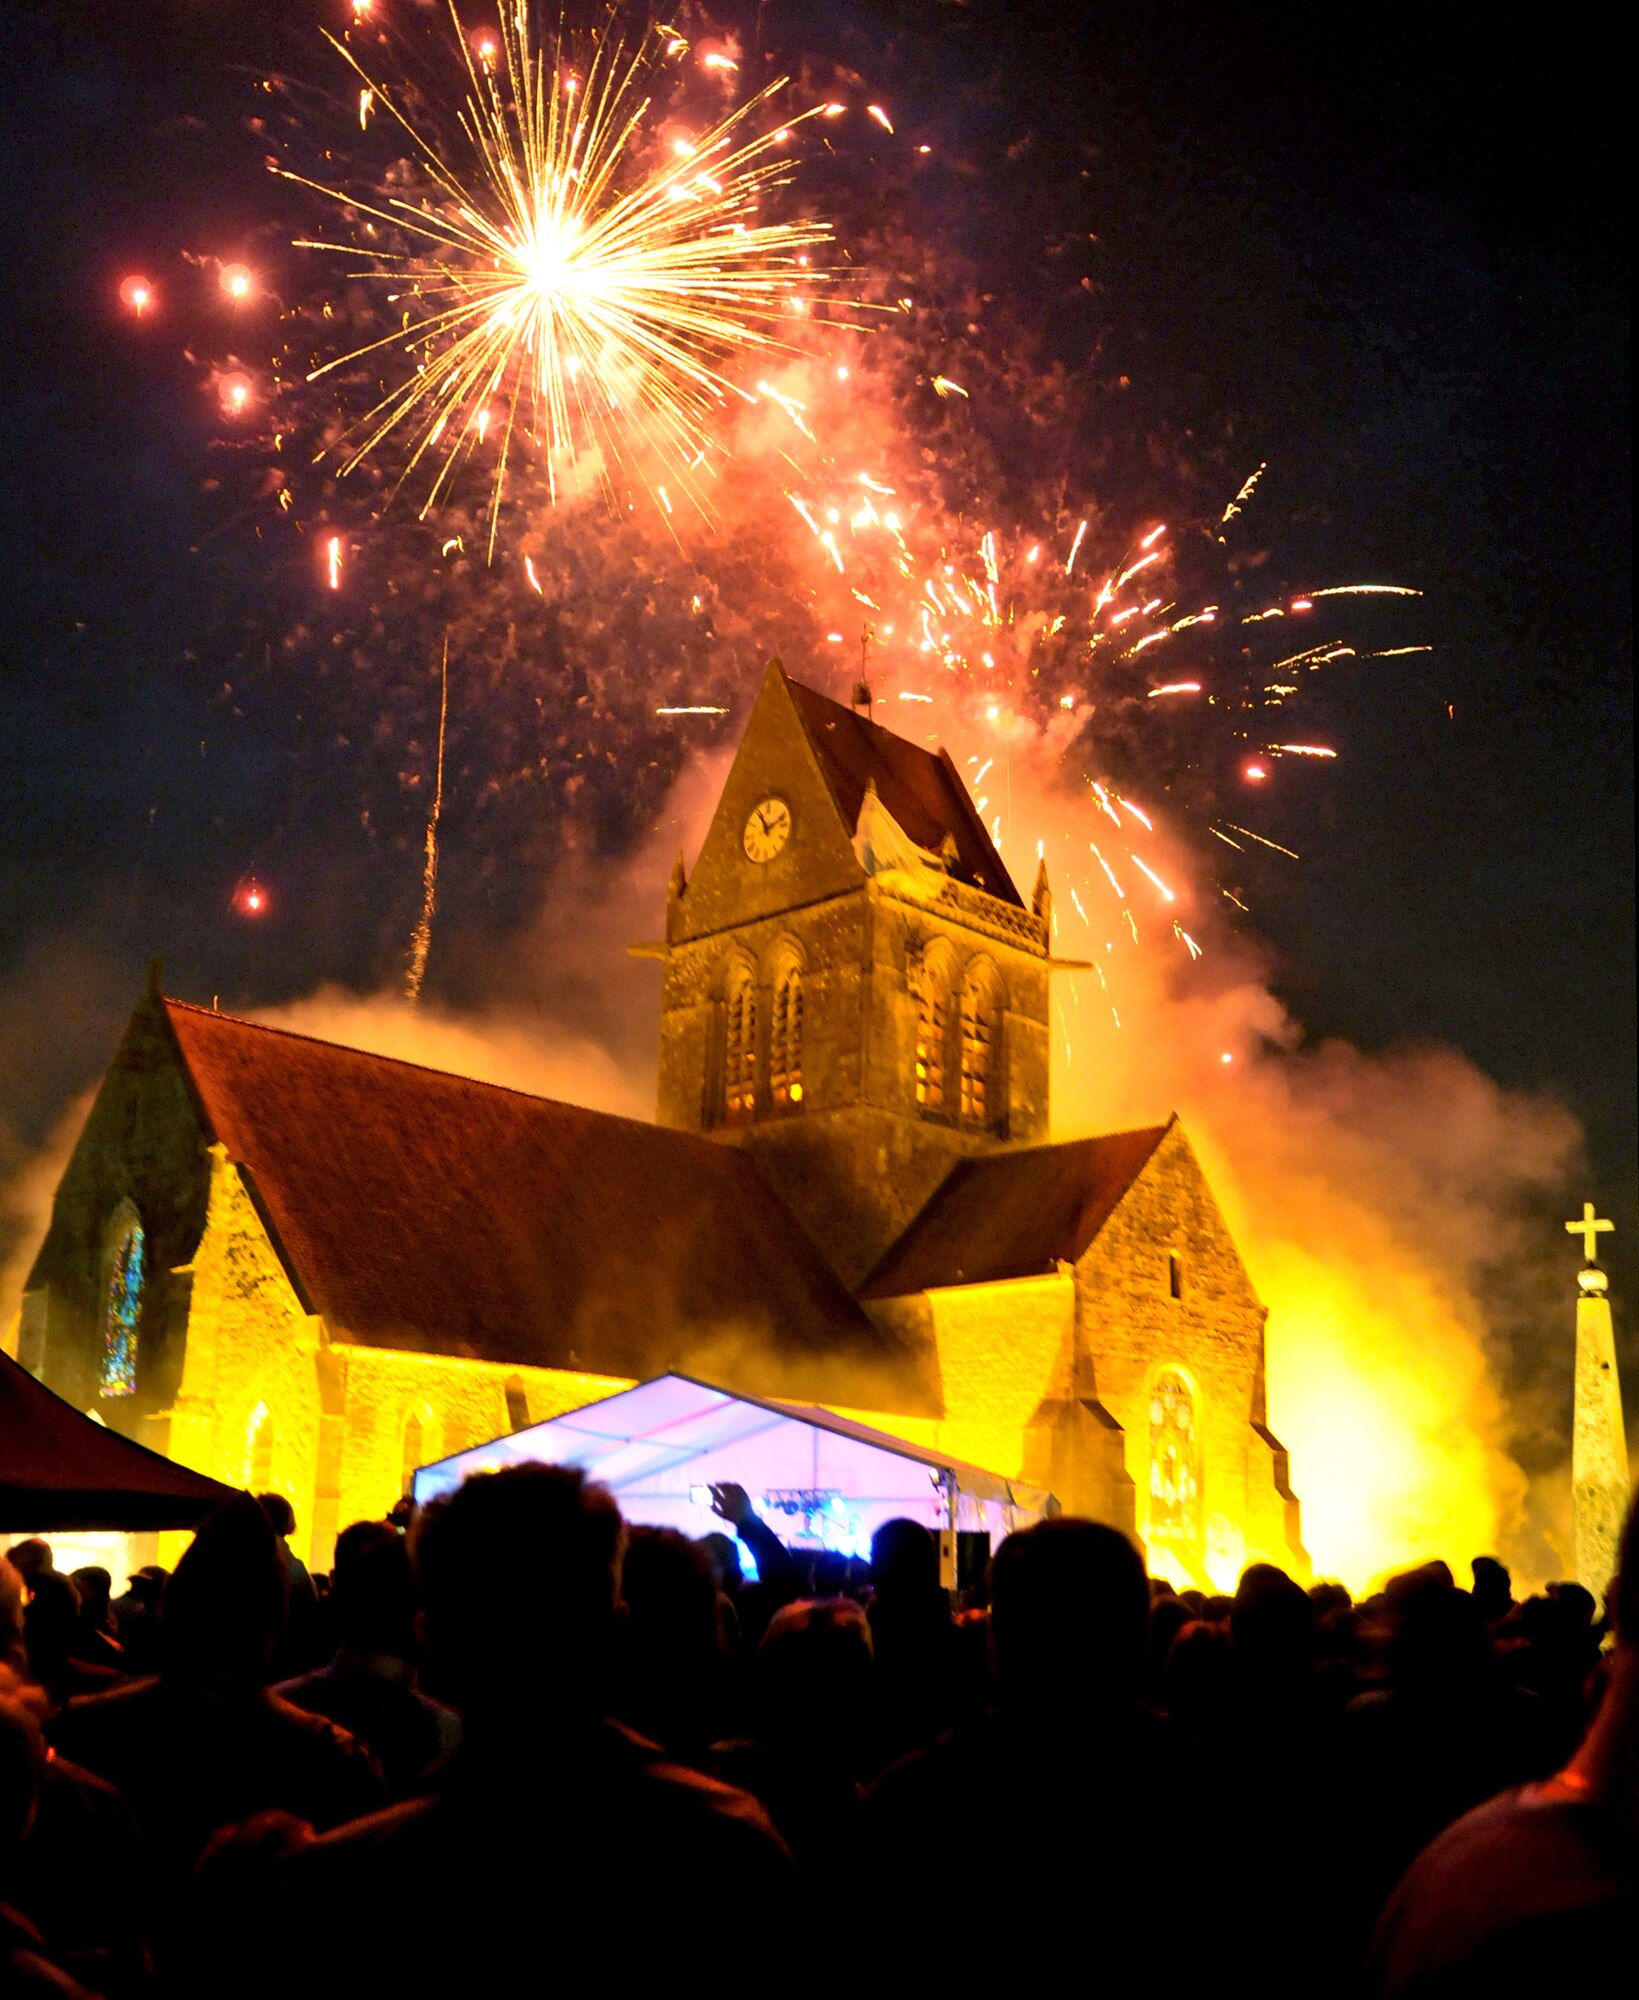 Fireworks burst June 5, 2010, over a church in St. Mere Eglise, France, during a celebration commemorating the 66th anniversary of the D-Day landings in World War II. French, British, German and American servicemembers participated in a memorial parachute drop here. (U.S. Air Force photo/Staff Sgt. Austin M. May)